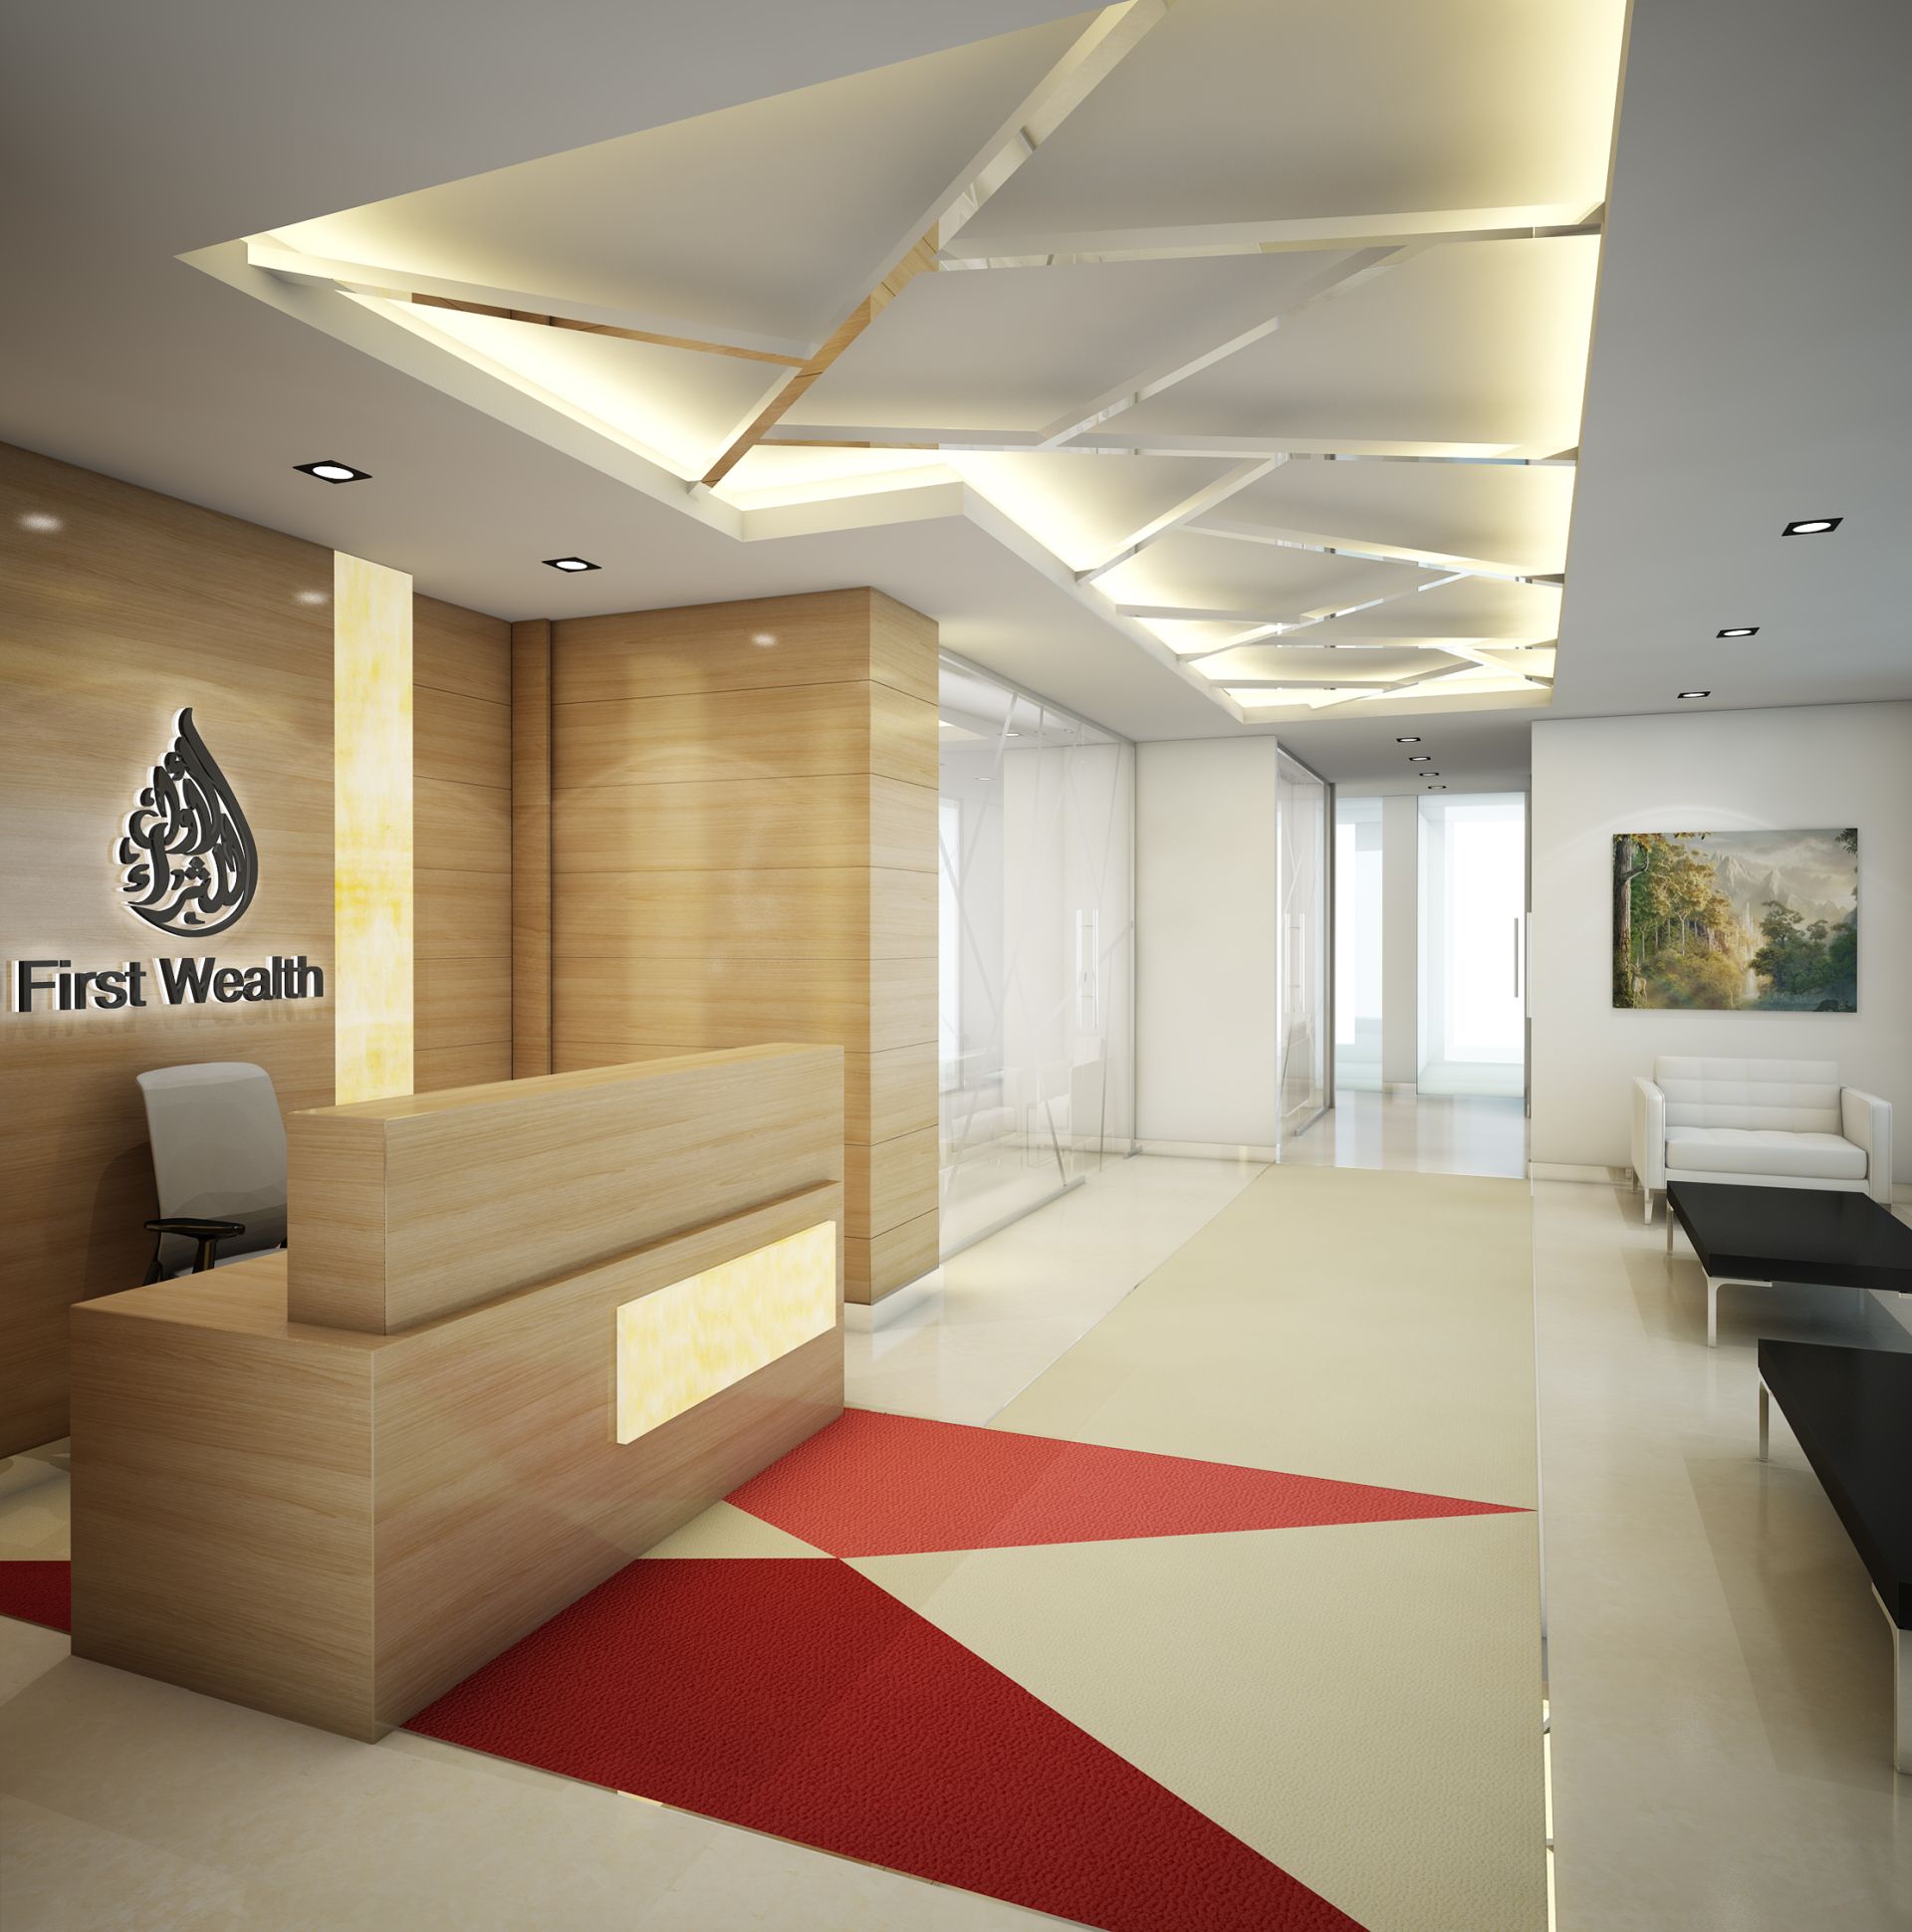 Interiors Fit Out Contractors In Sharjah Bond Interiors Love